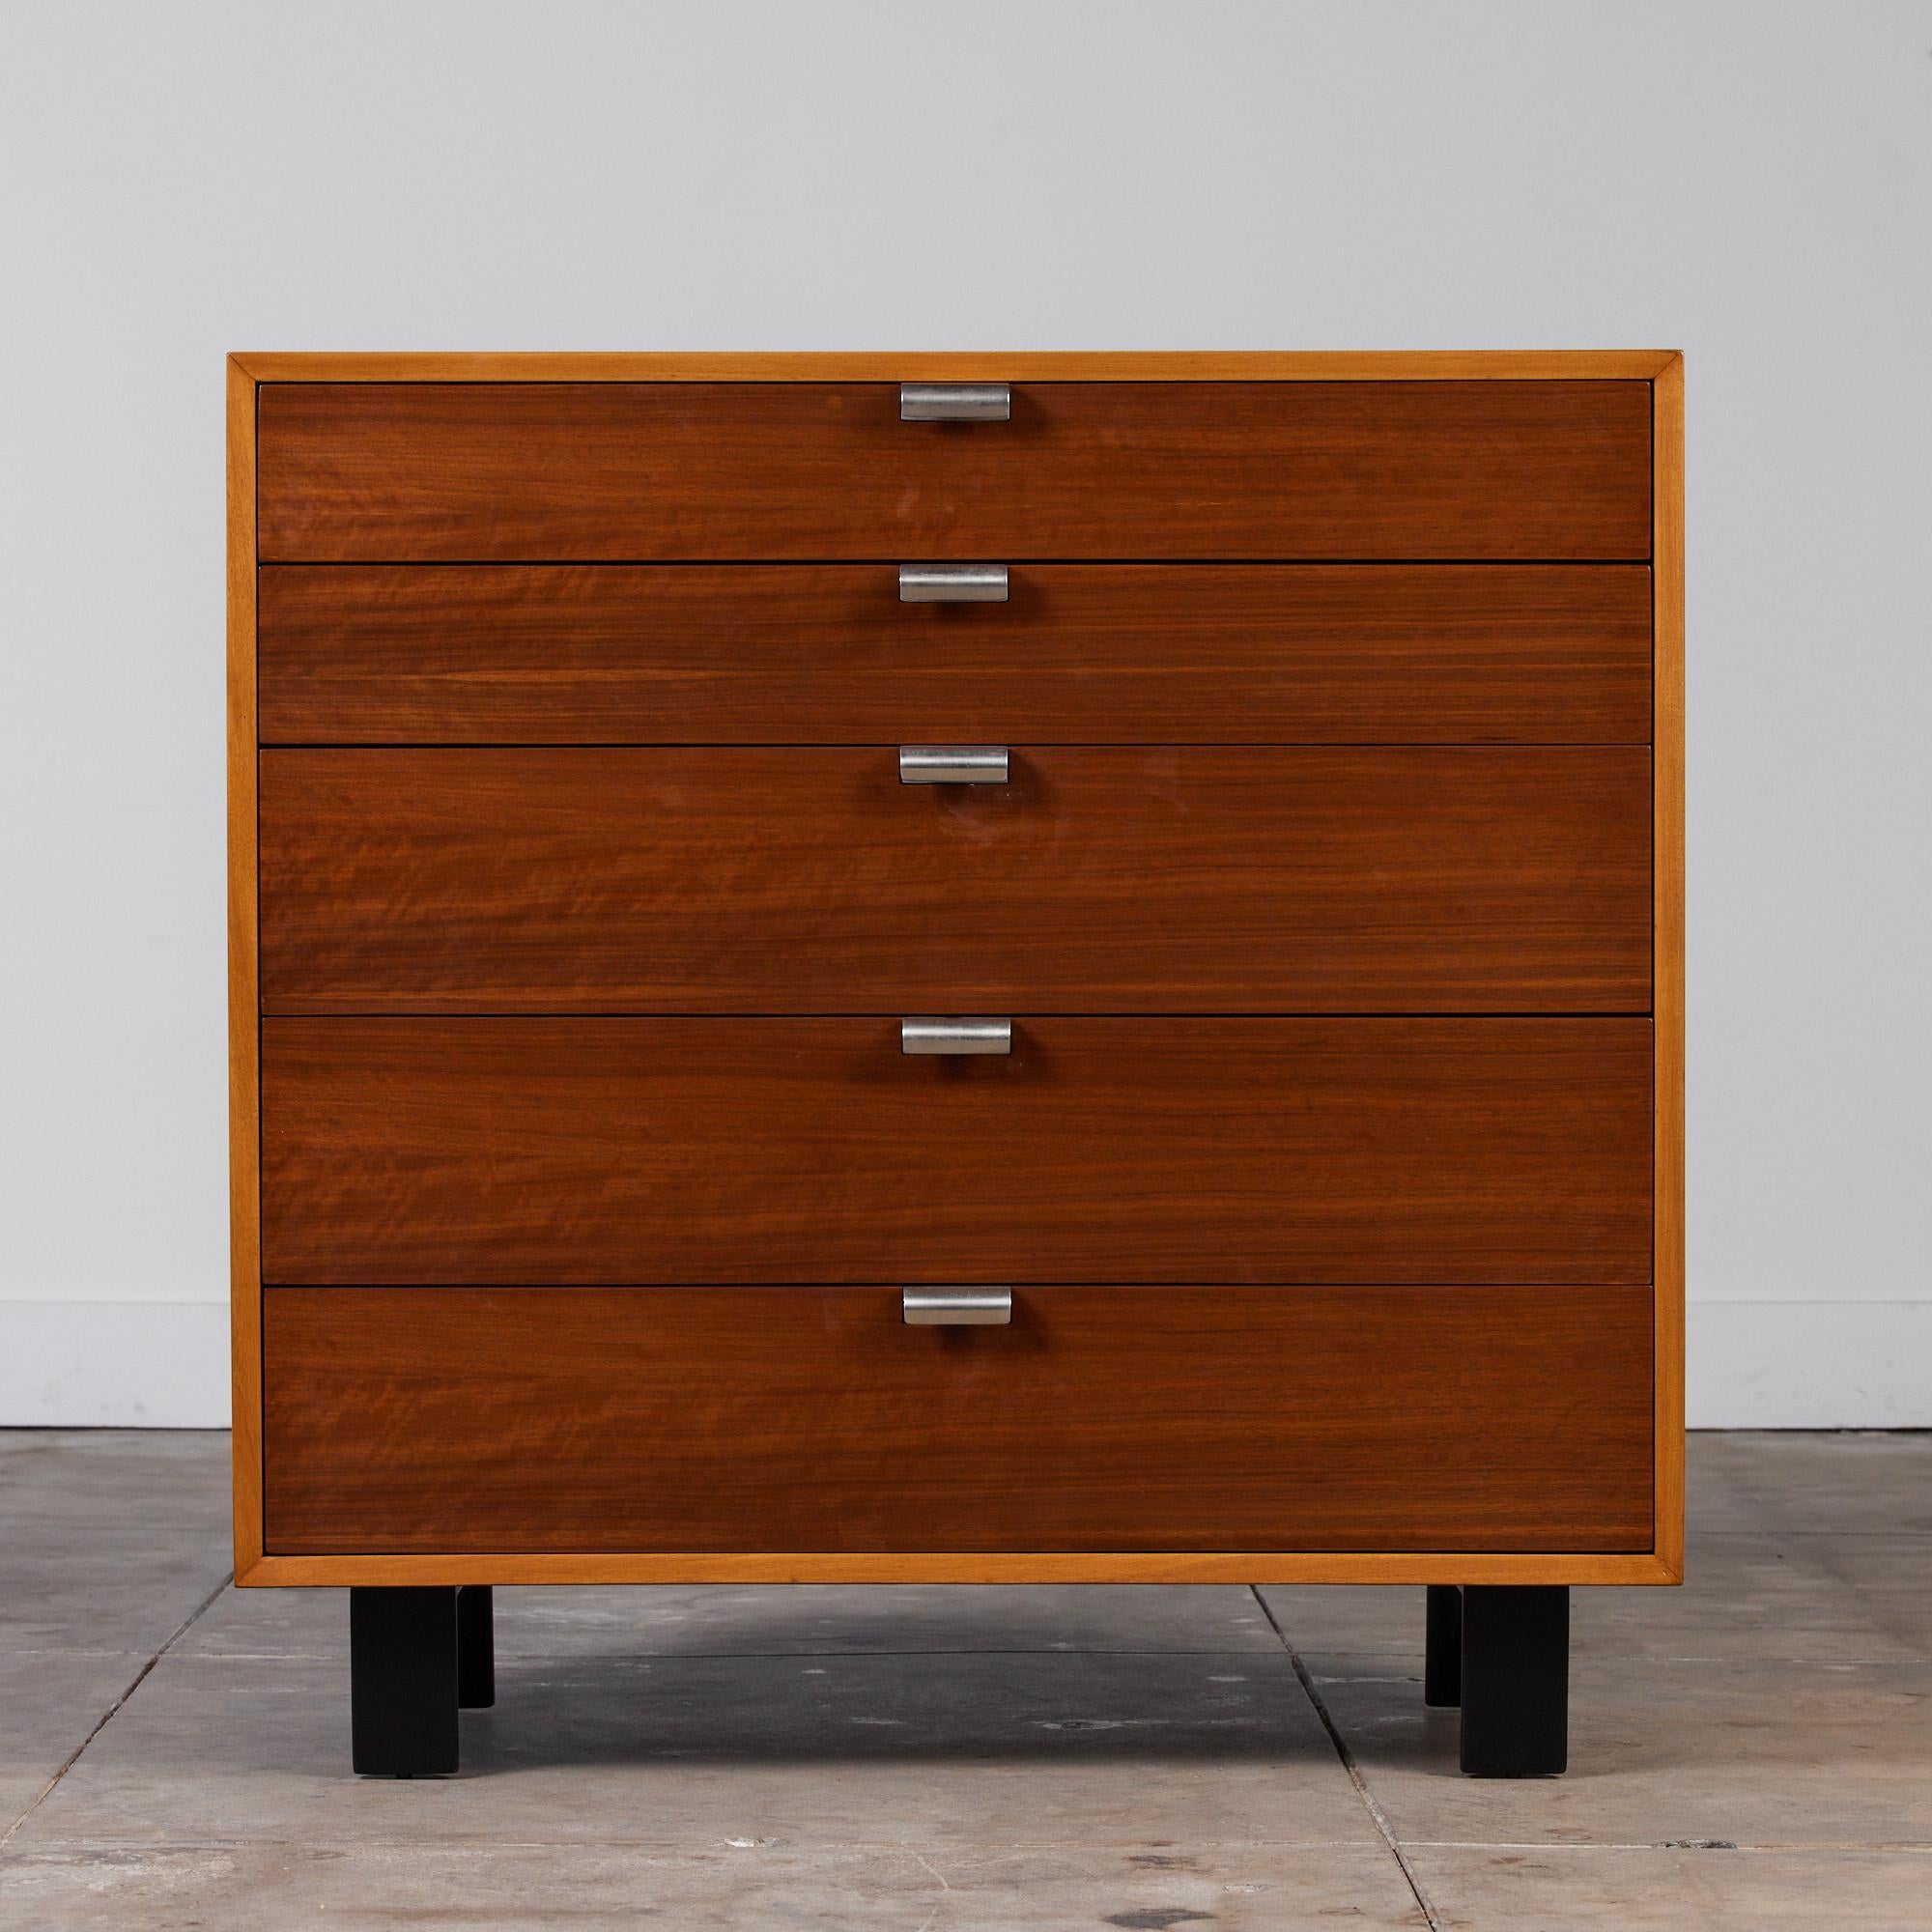 Dresser by George Nelson for Herman Miller, c.1950s. This five-drawer dresser features a walnut frame with sculpted aluminum pulls and sits atop four short plinth black legs. The top drawer features separations for smaller belongings and bears the